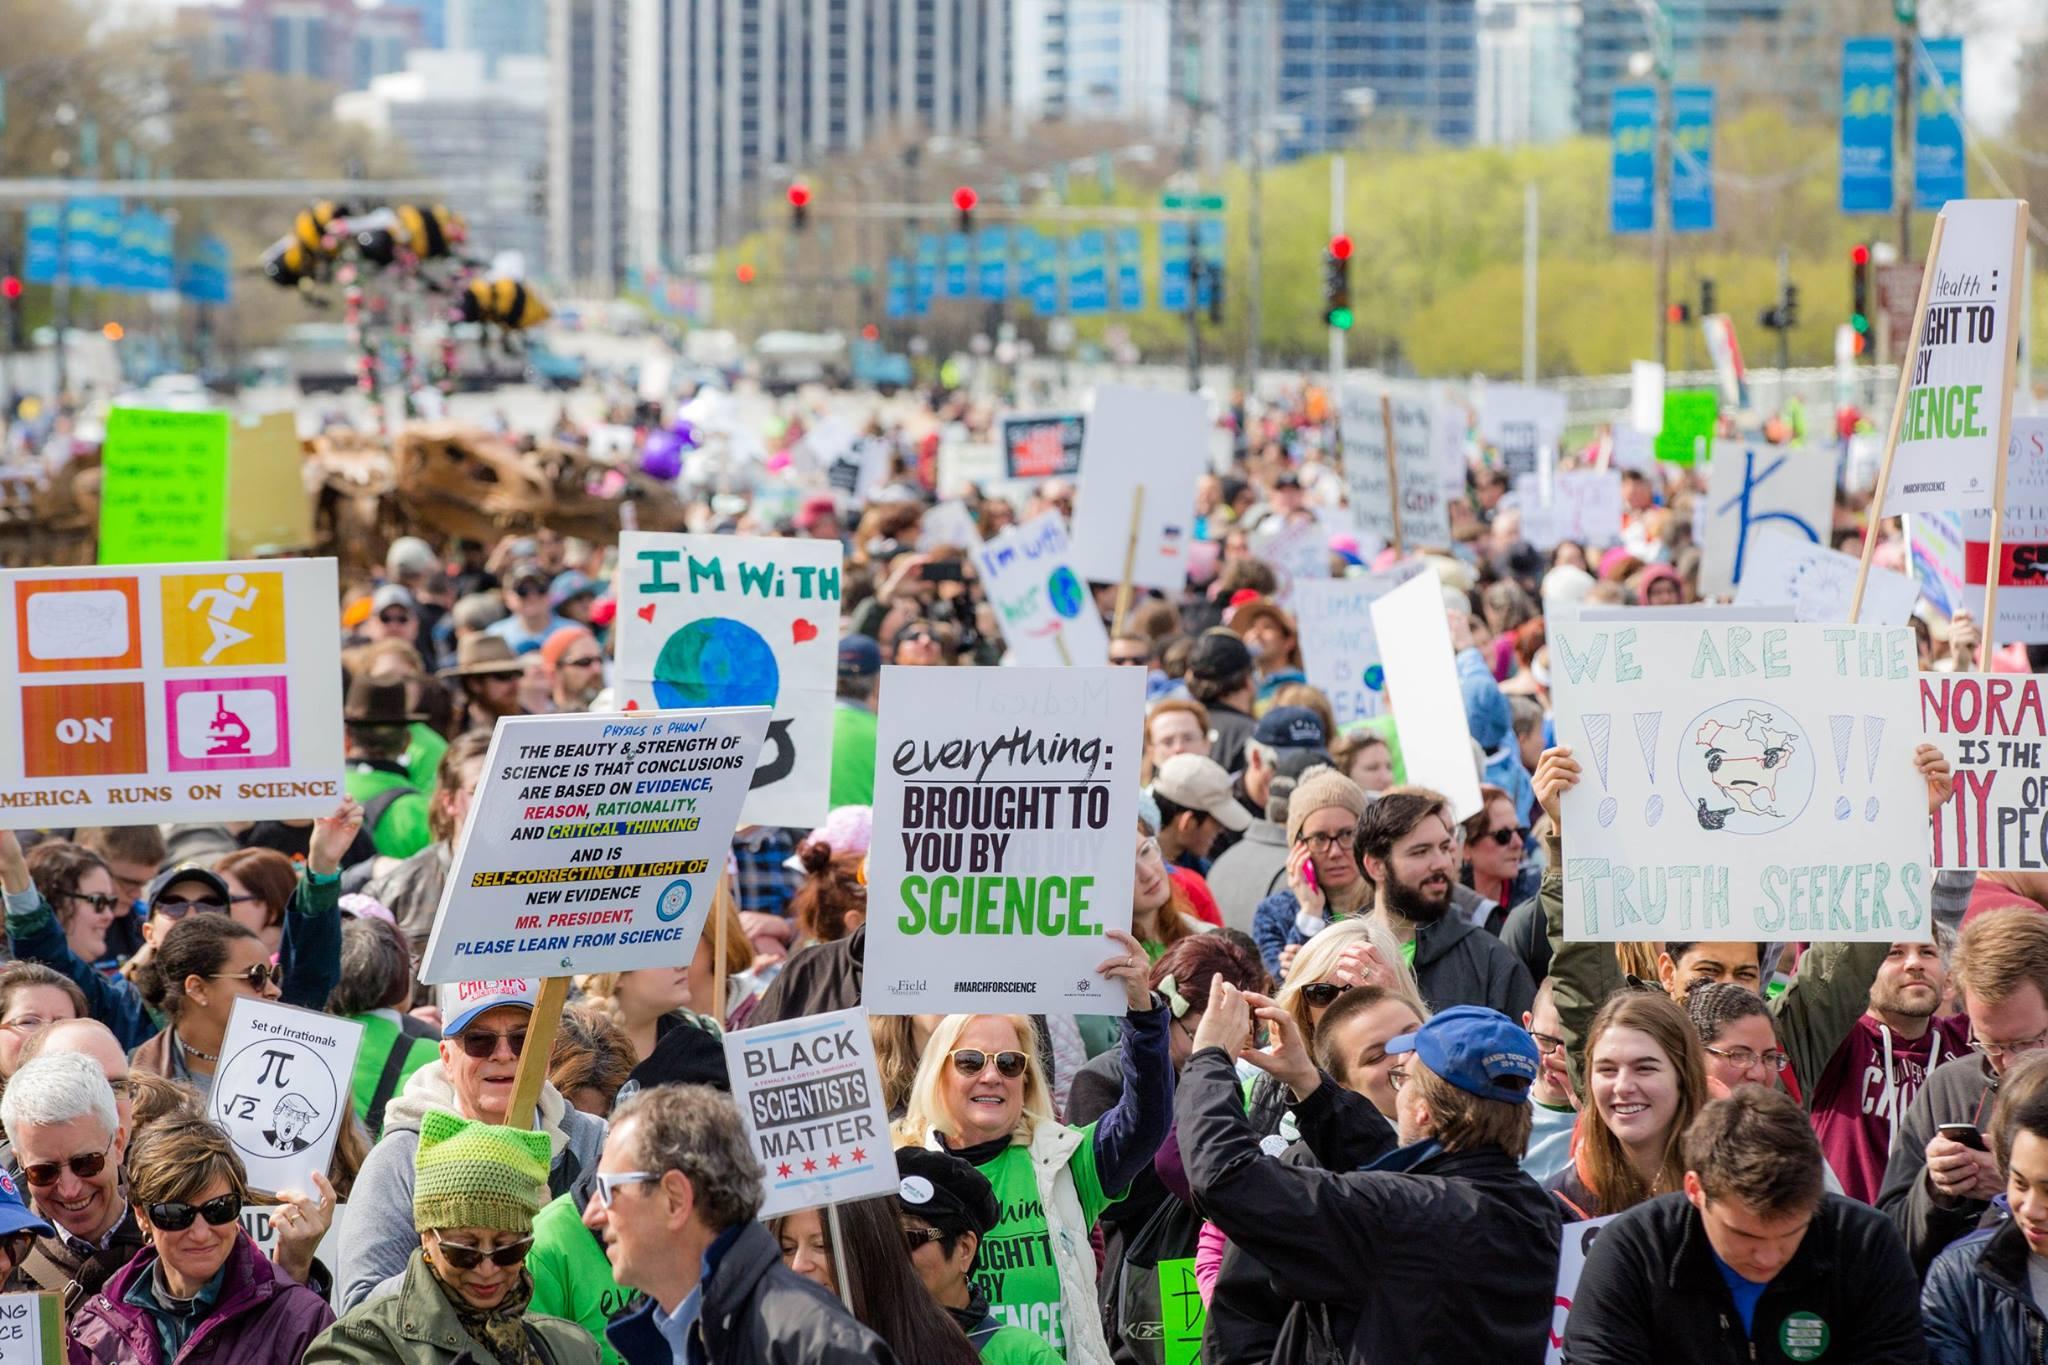 Chicago's inaugural March for Science in 2017 drew an estimated 60,000 participants. (Zachary James Johnston / United Sciences of Chicago)